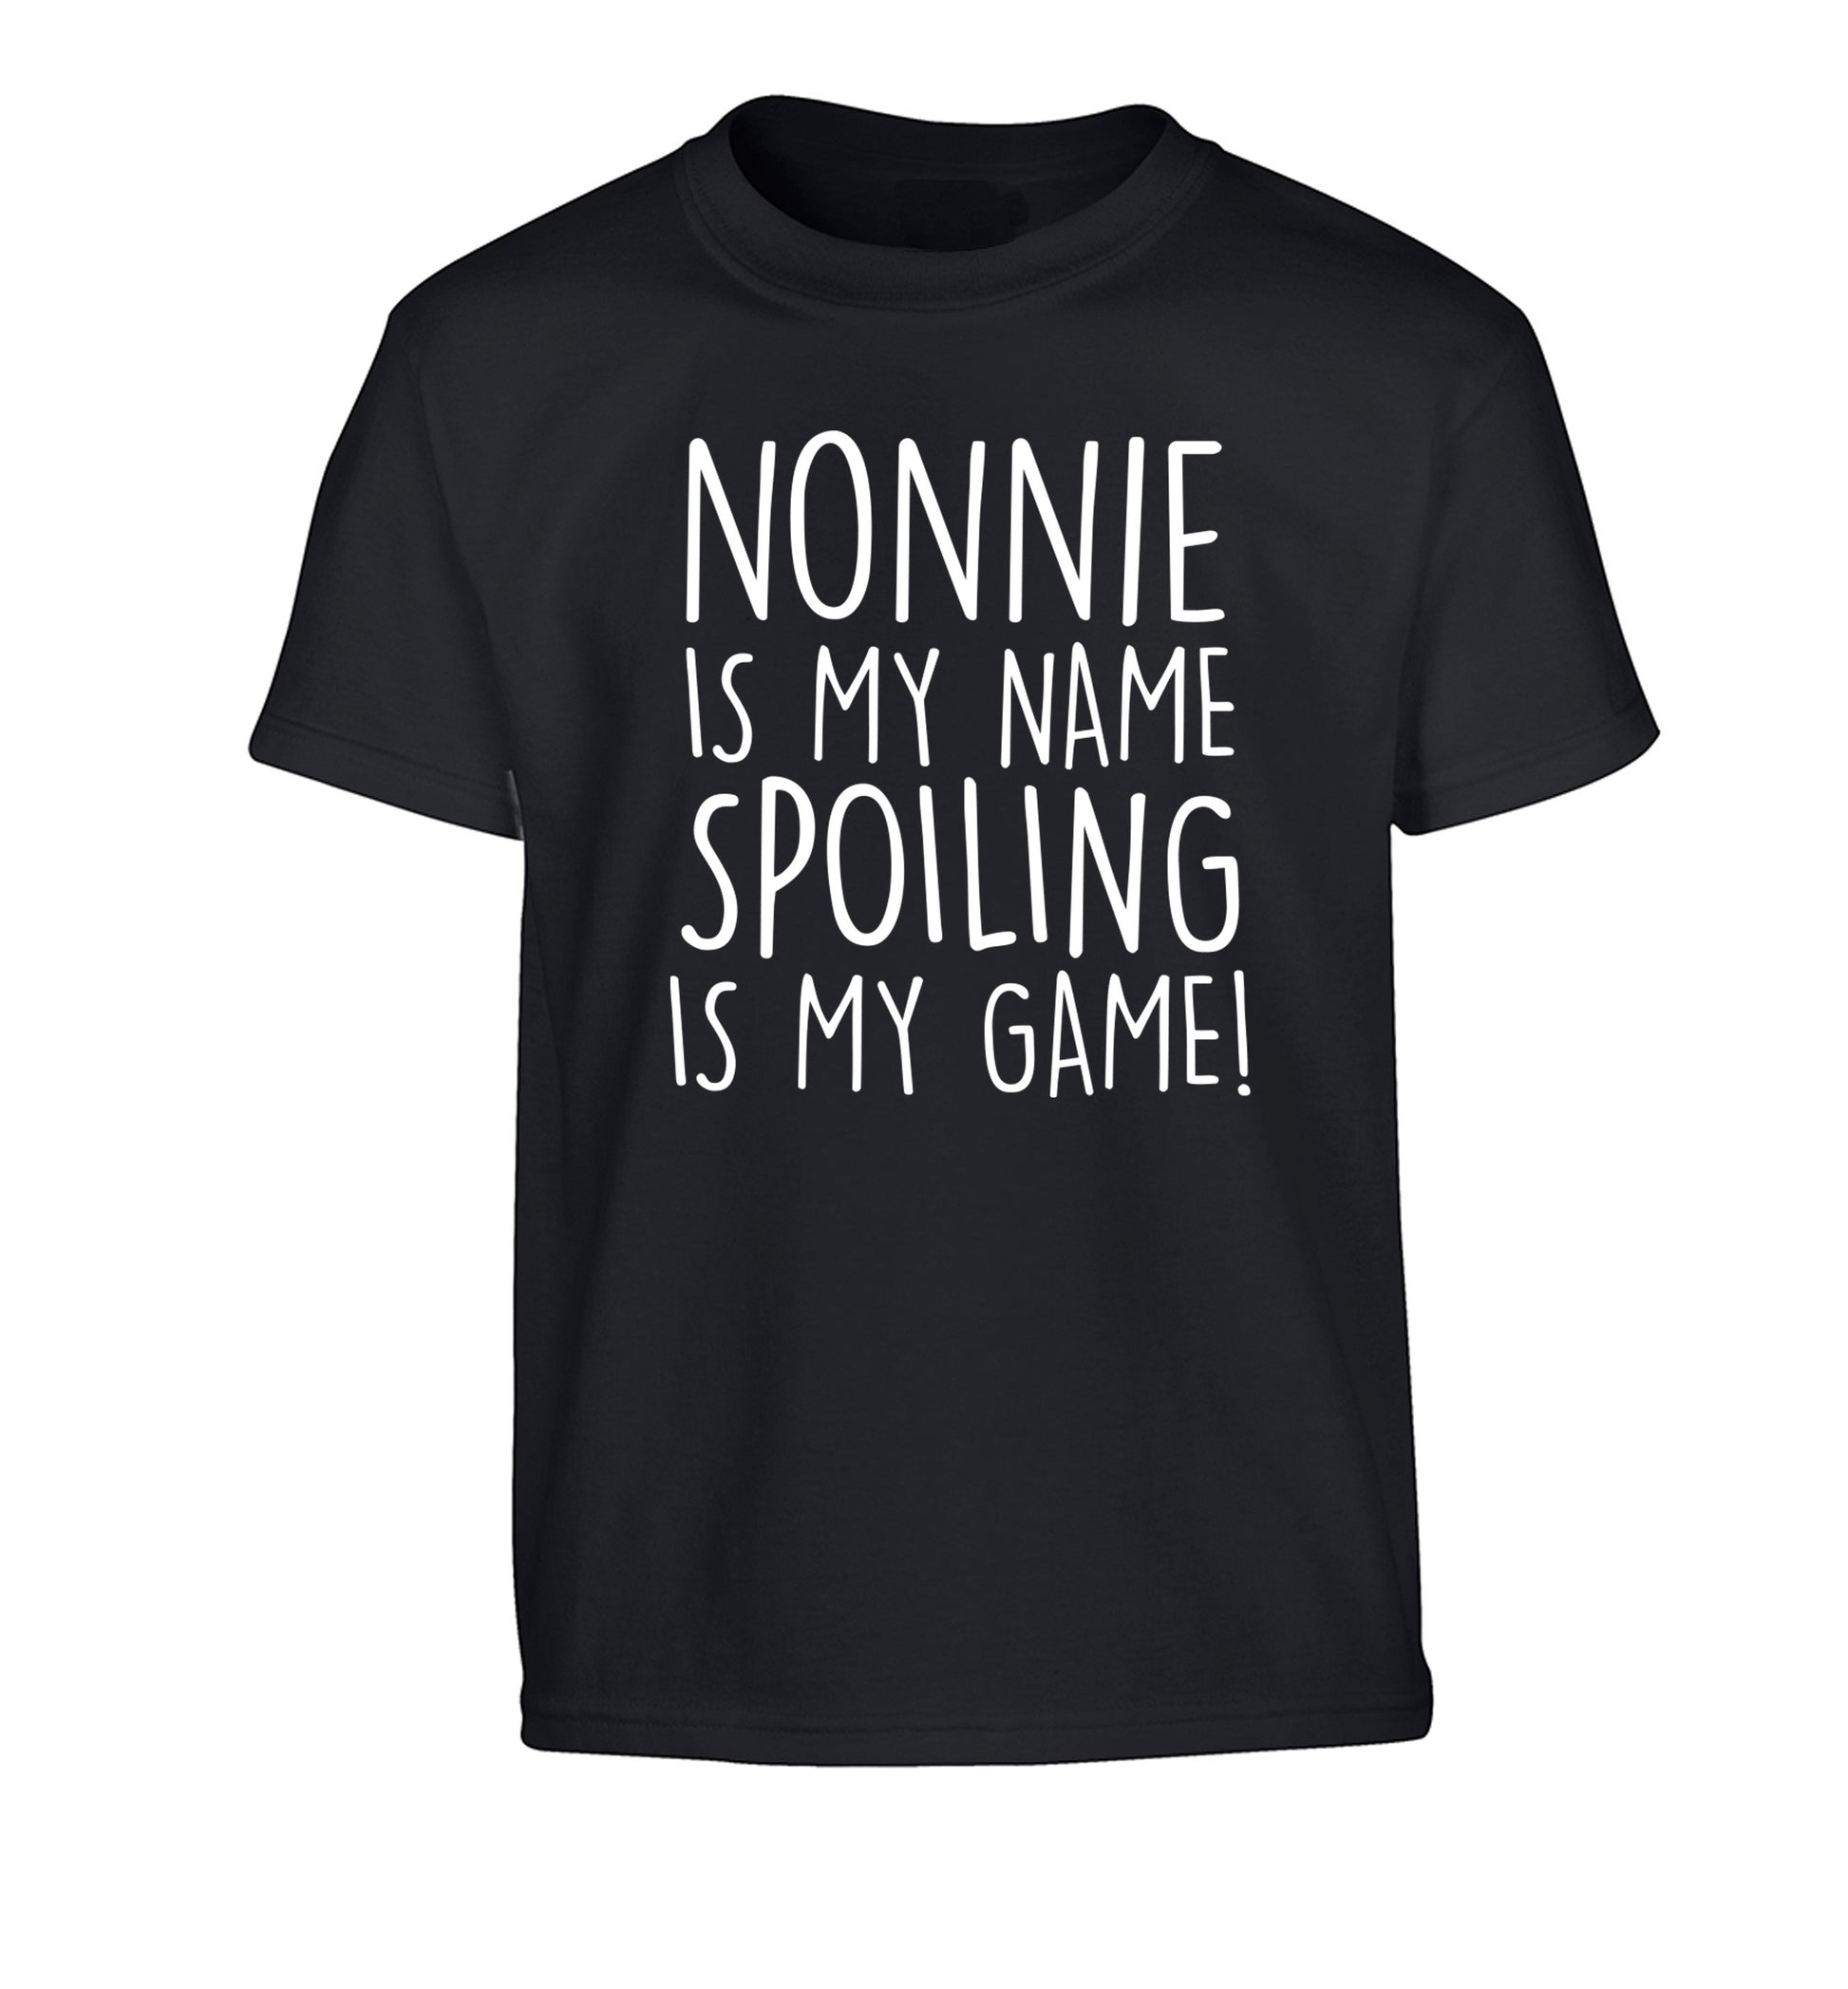 Nonnie is my name, spoiling is my game Children's black Tshirt 12-14 Years